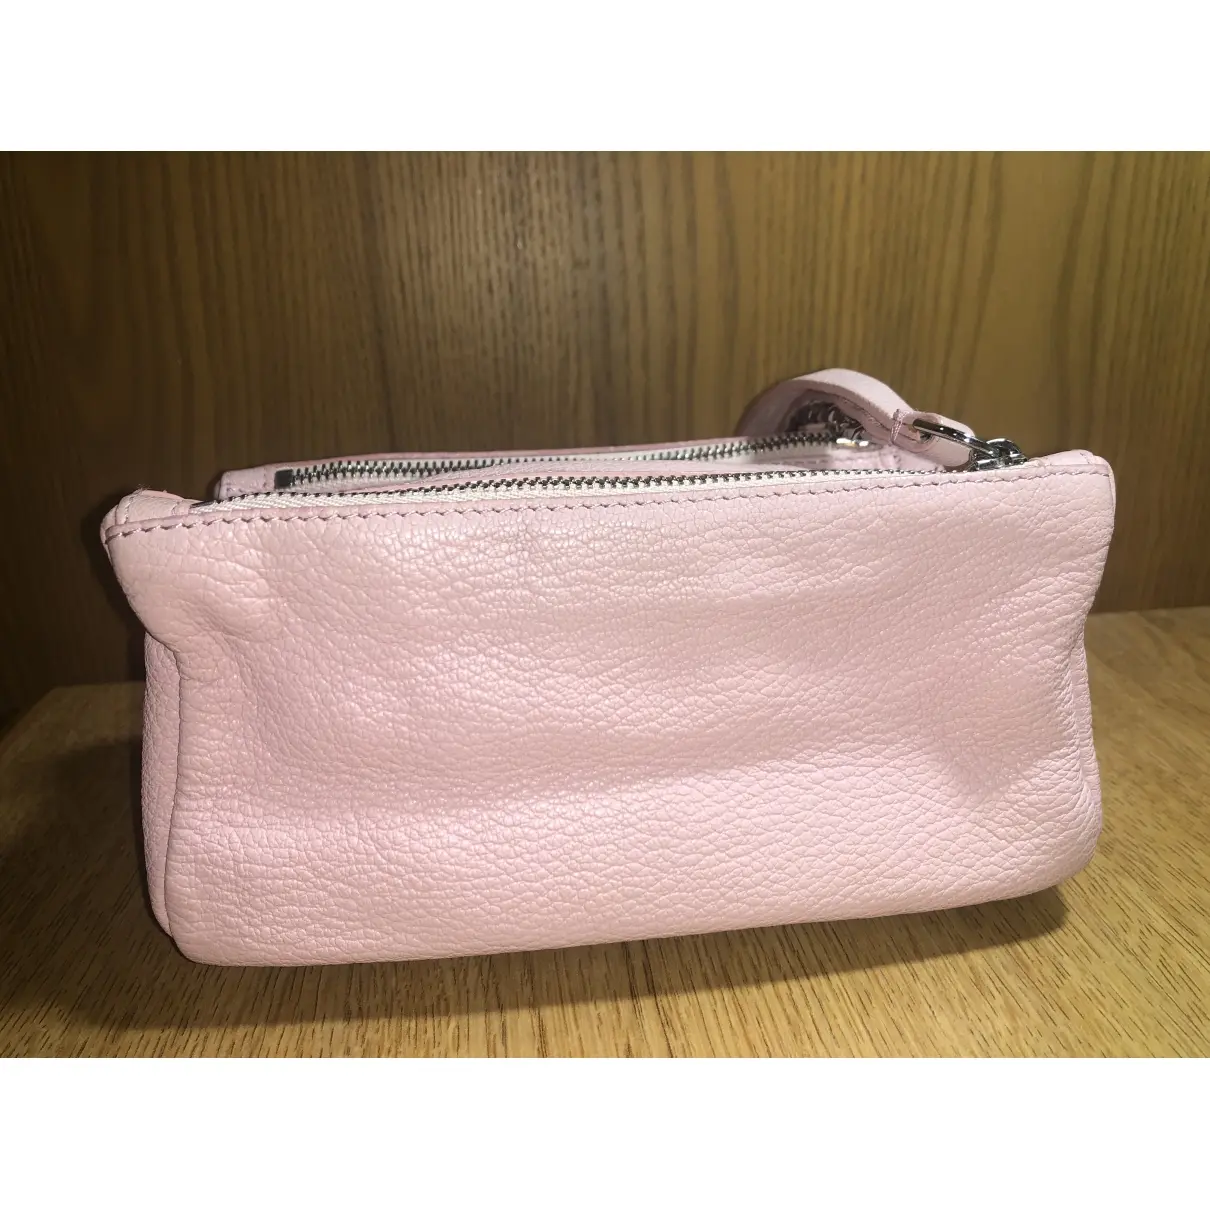 Givenchy Pandora leather clutch bag for sale